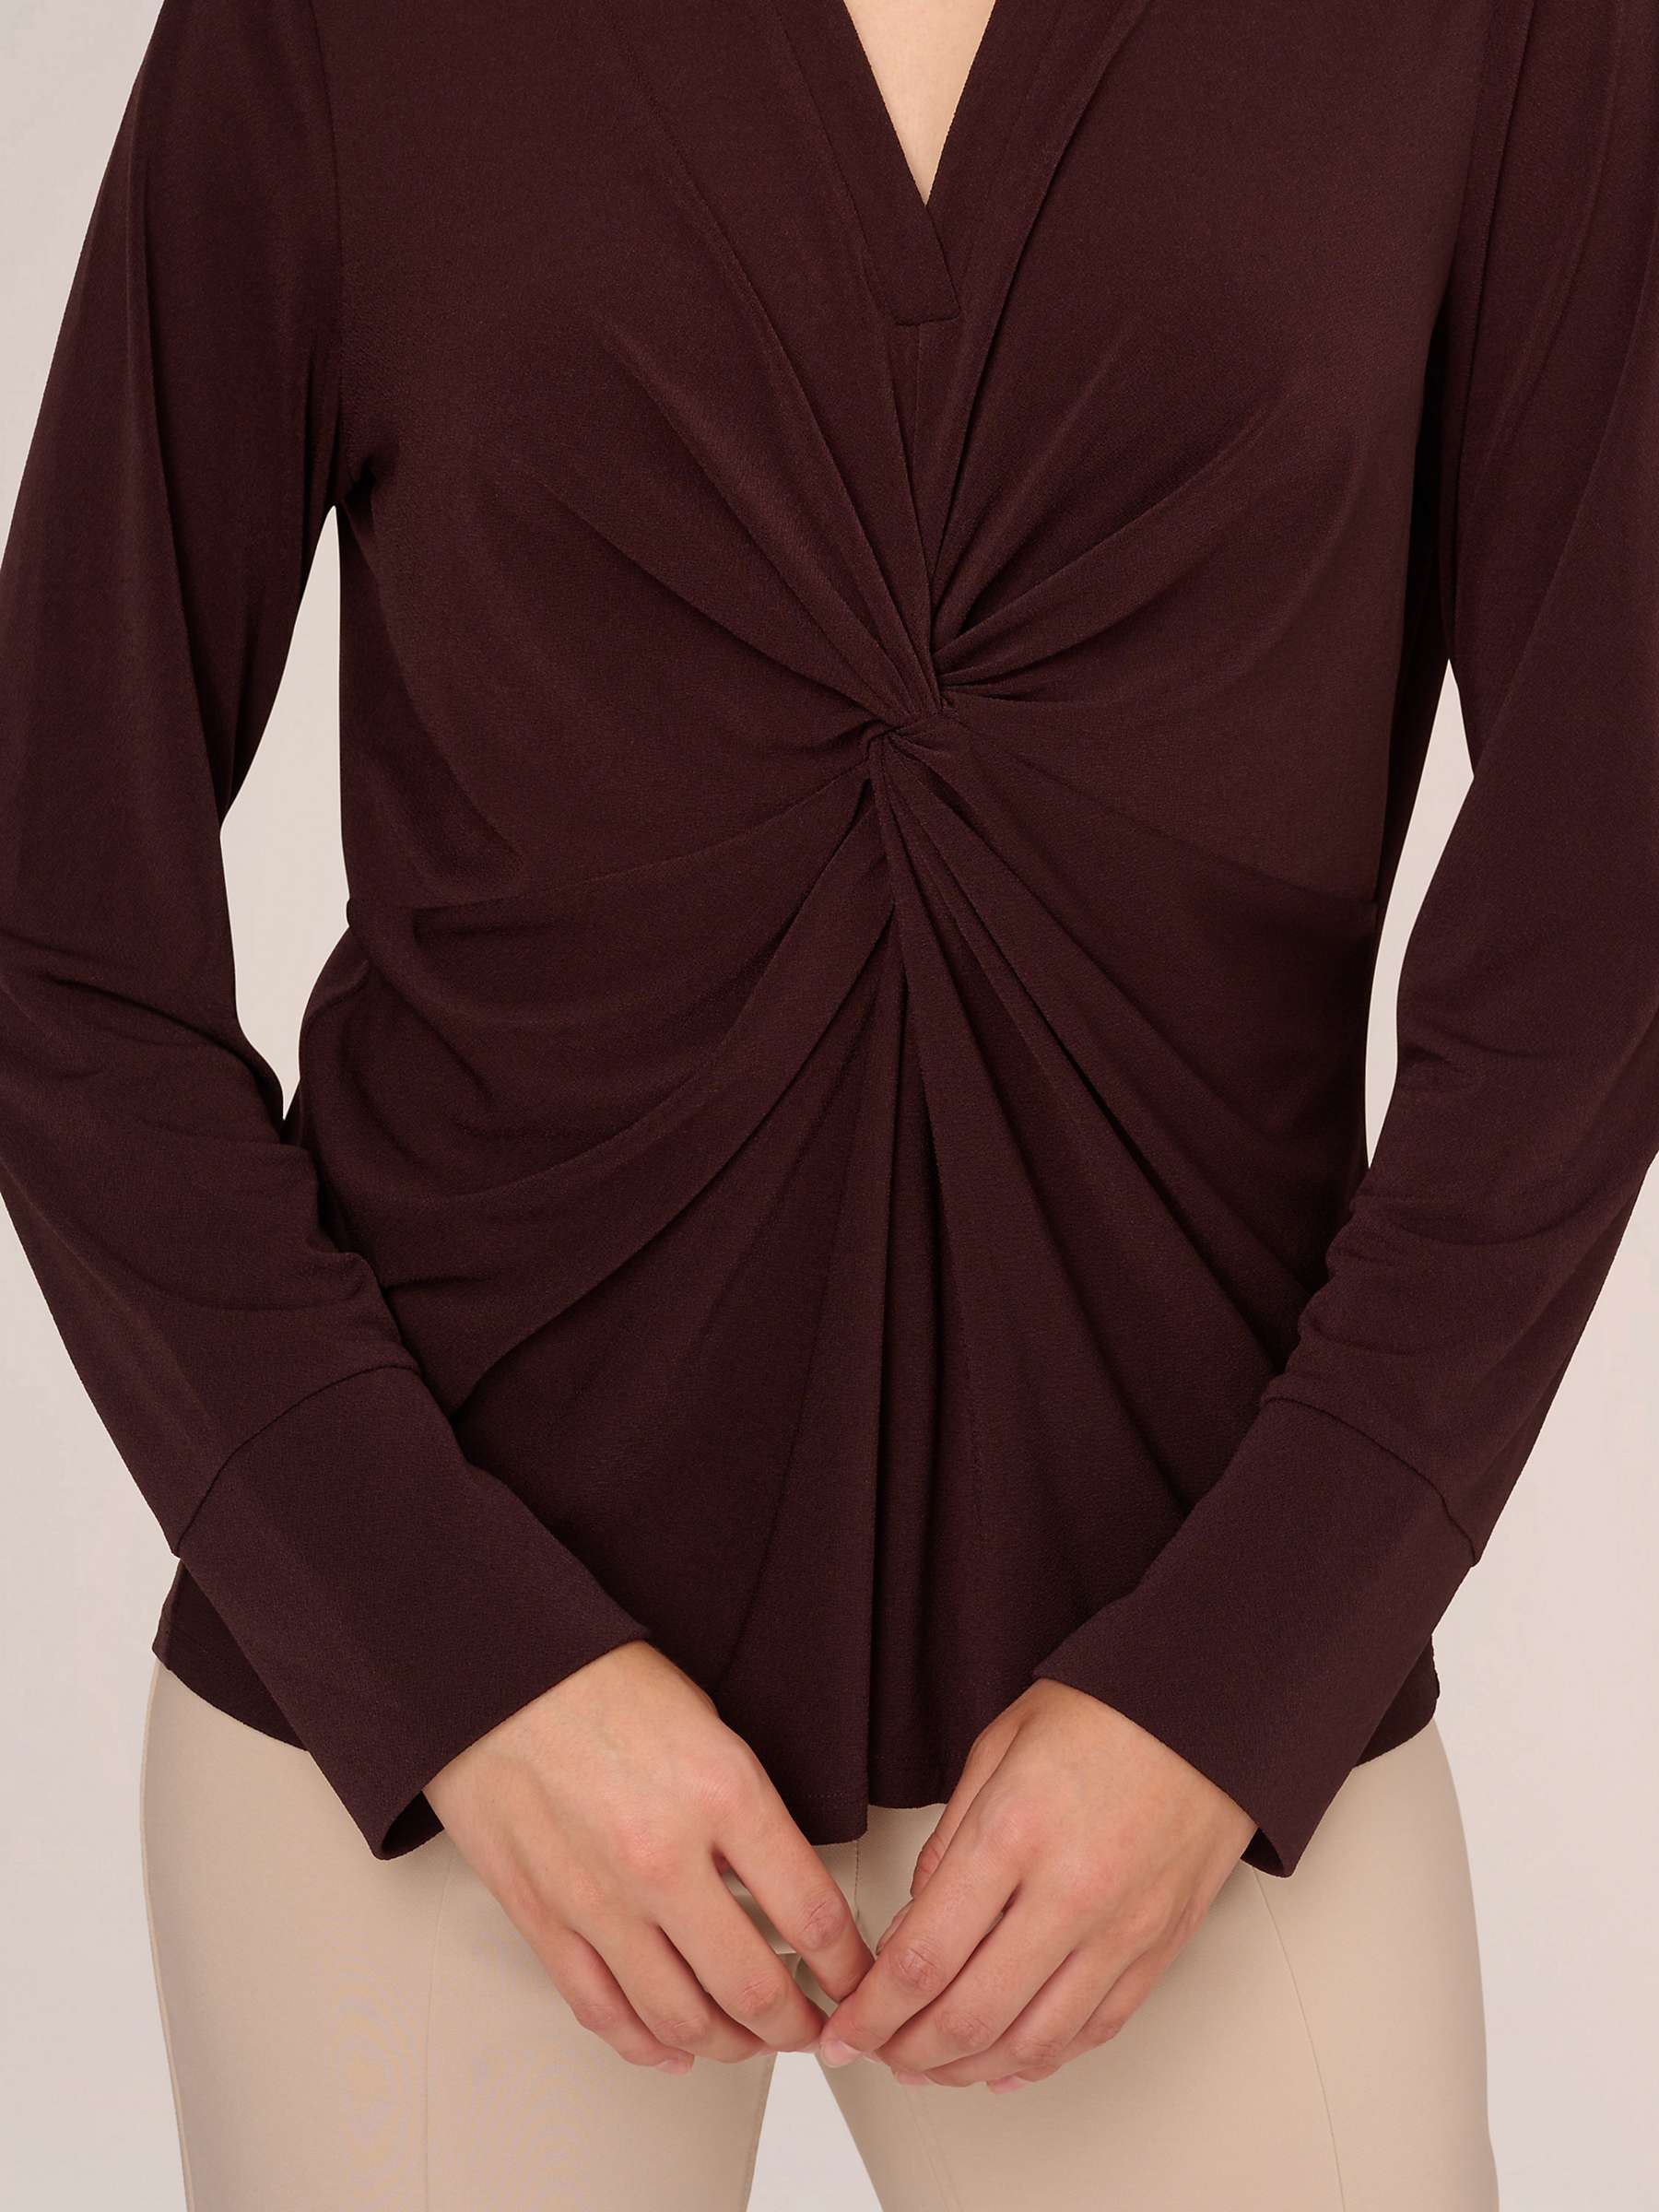 Buy Adrianna Papell Twist Front Long Sleeve Top Online at johnlewis.com